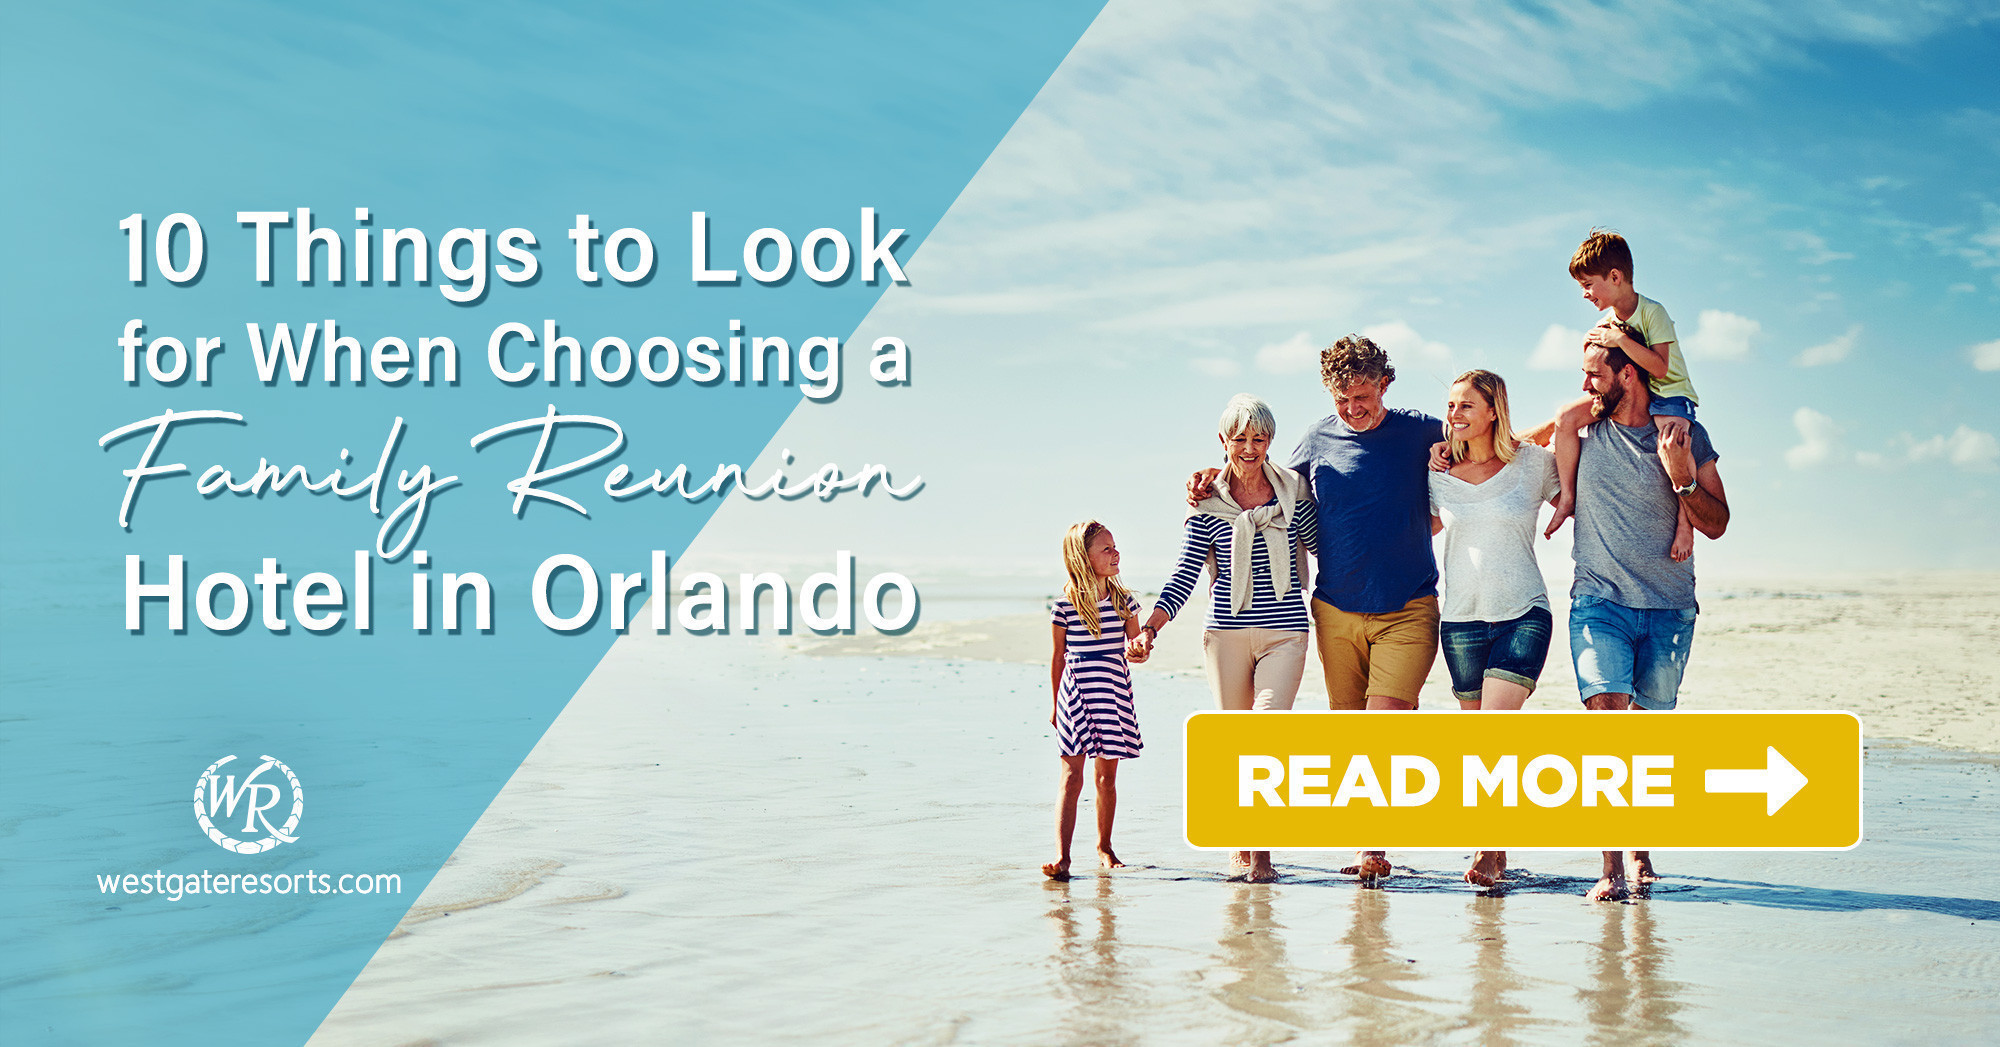 10 Things to Look for When Choosing a Family Reunion Hotel in Orlando